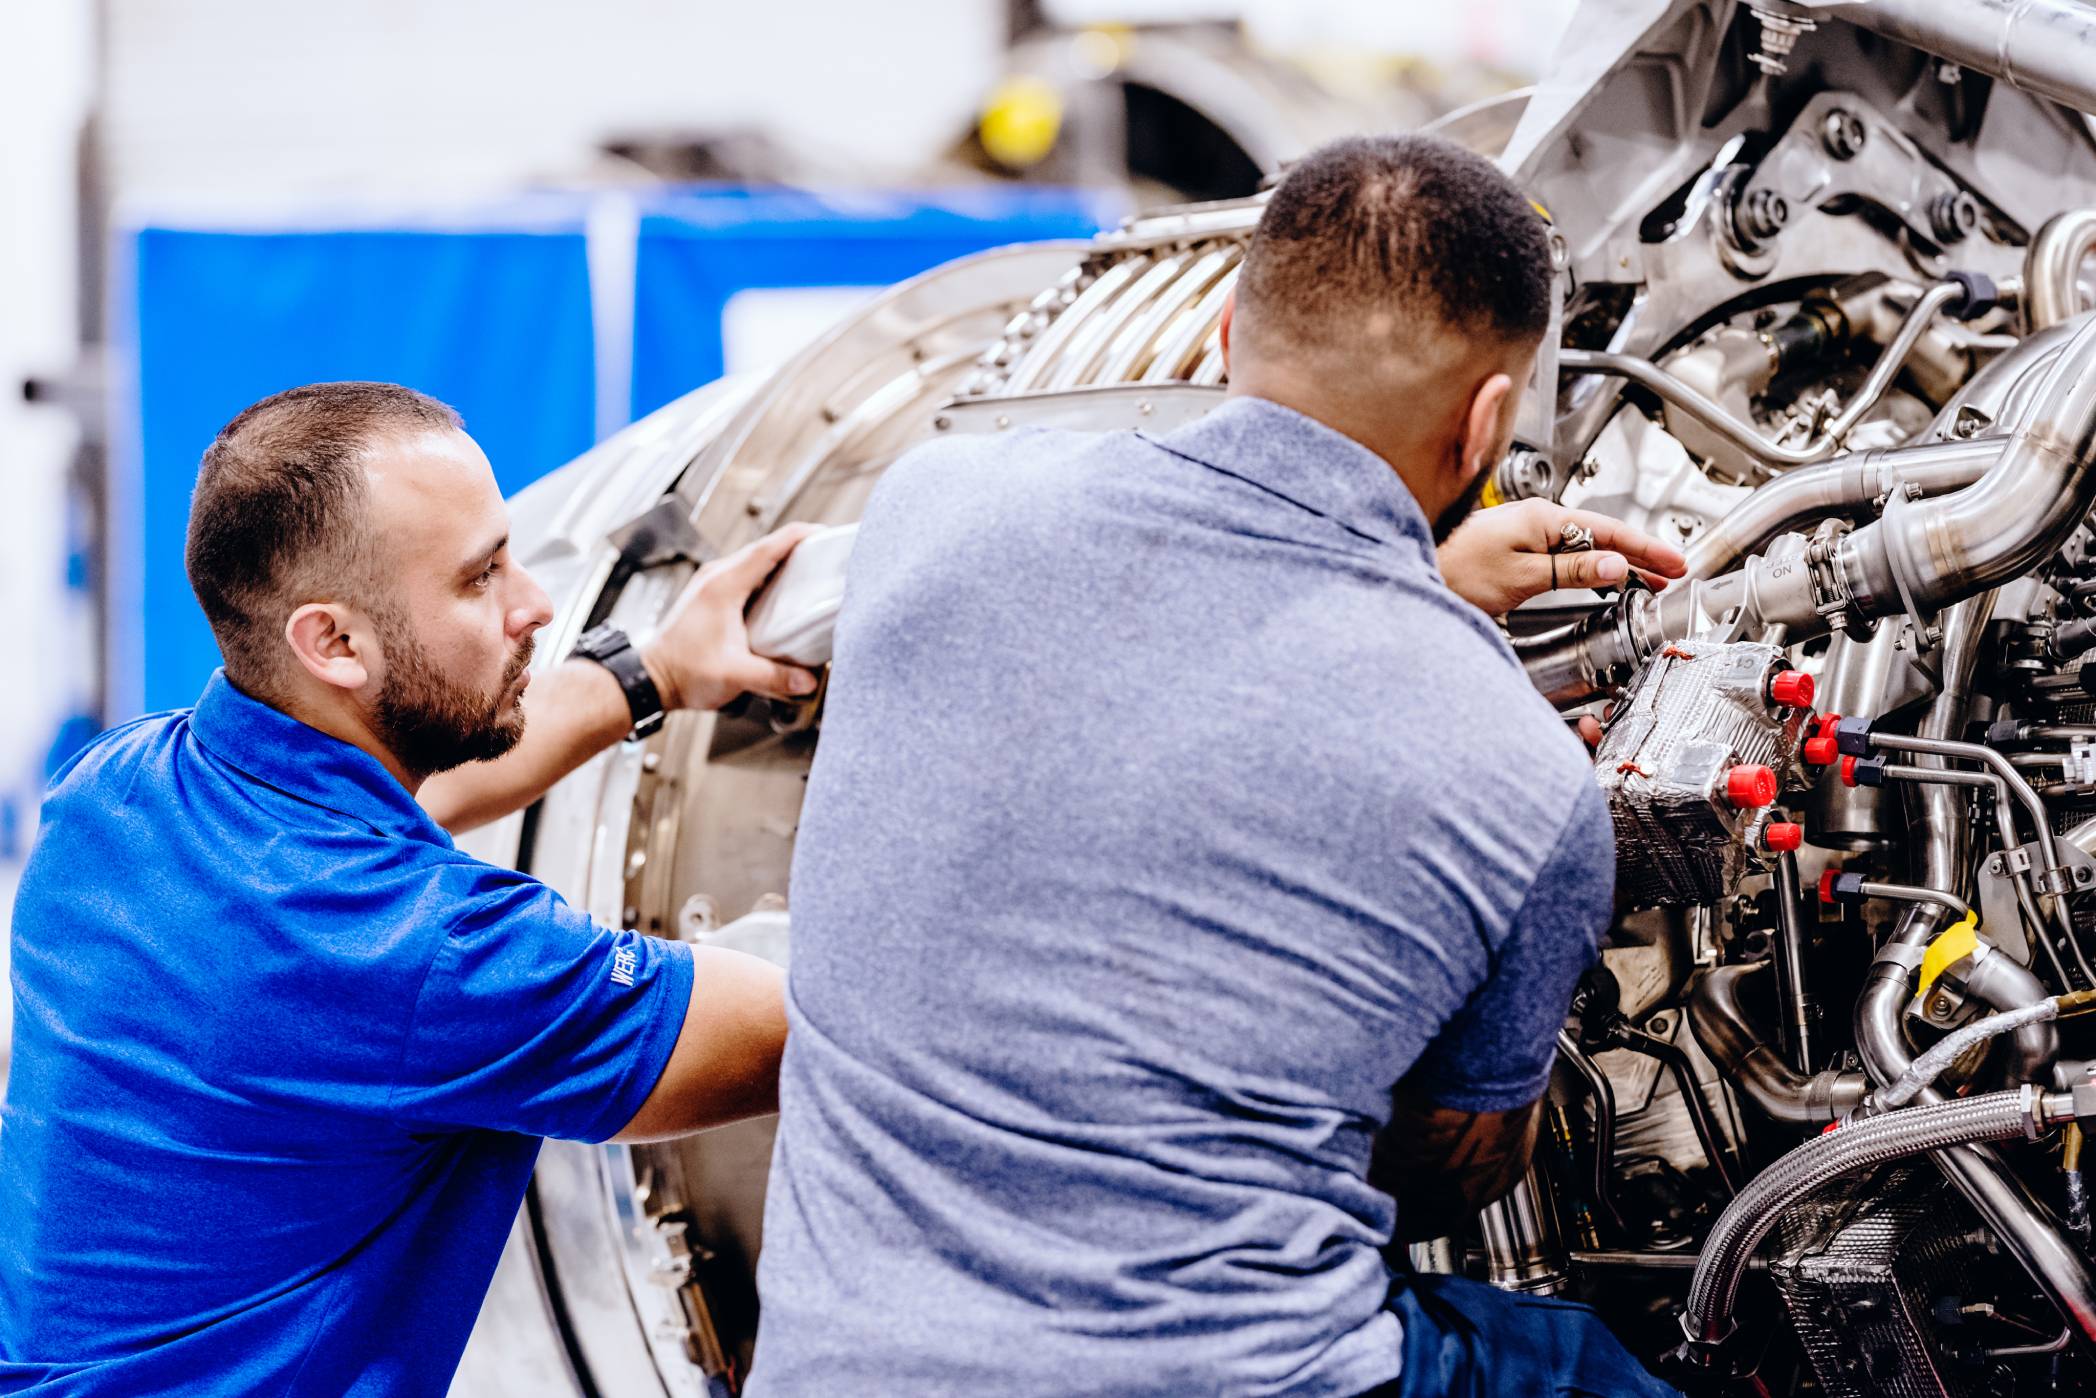 Two Willis aircraft mechanics work on an engine, providing key jet maintenance that is only part of its overall services.